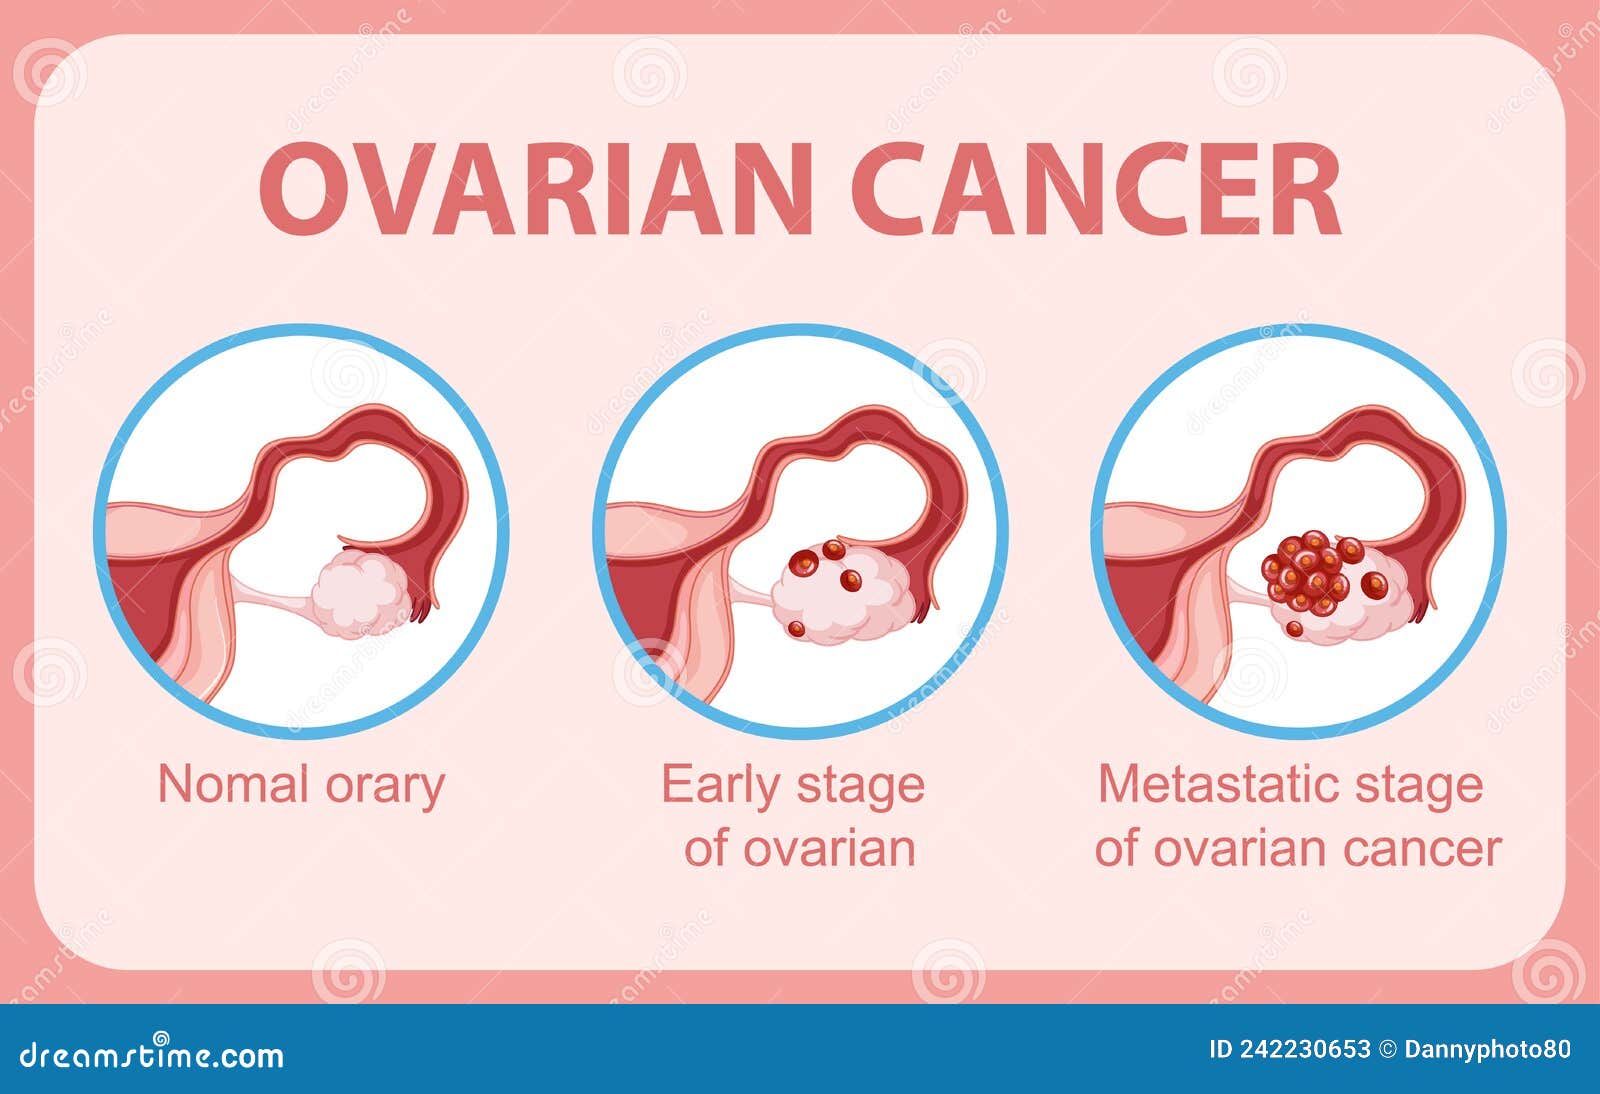 Ovarian Cancer Infographic Infographic Stock Vector - Illustration of ...